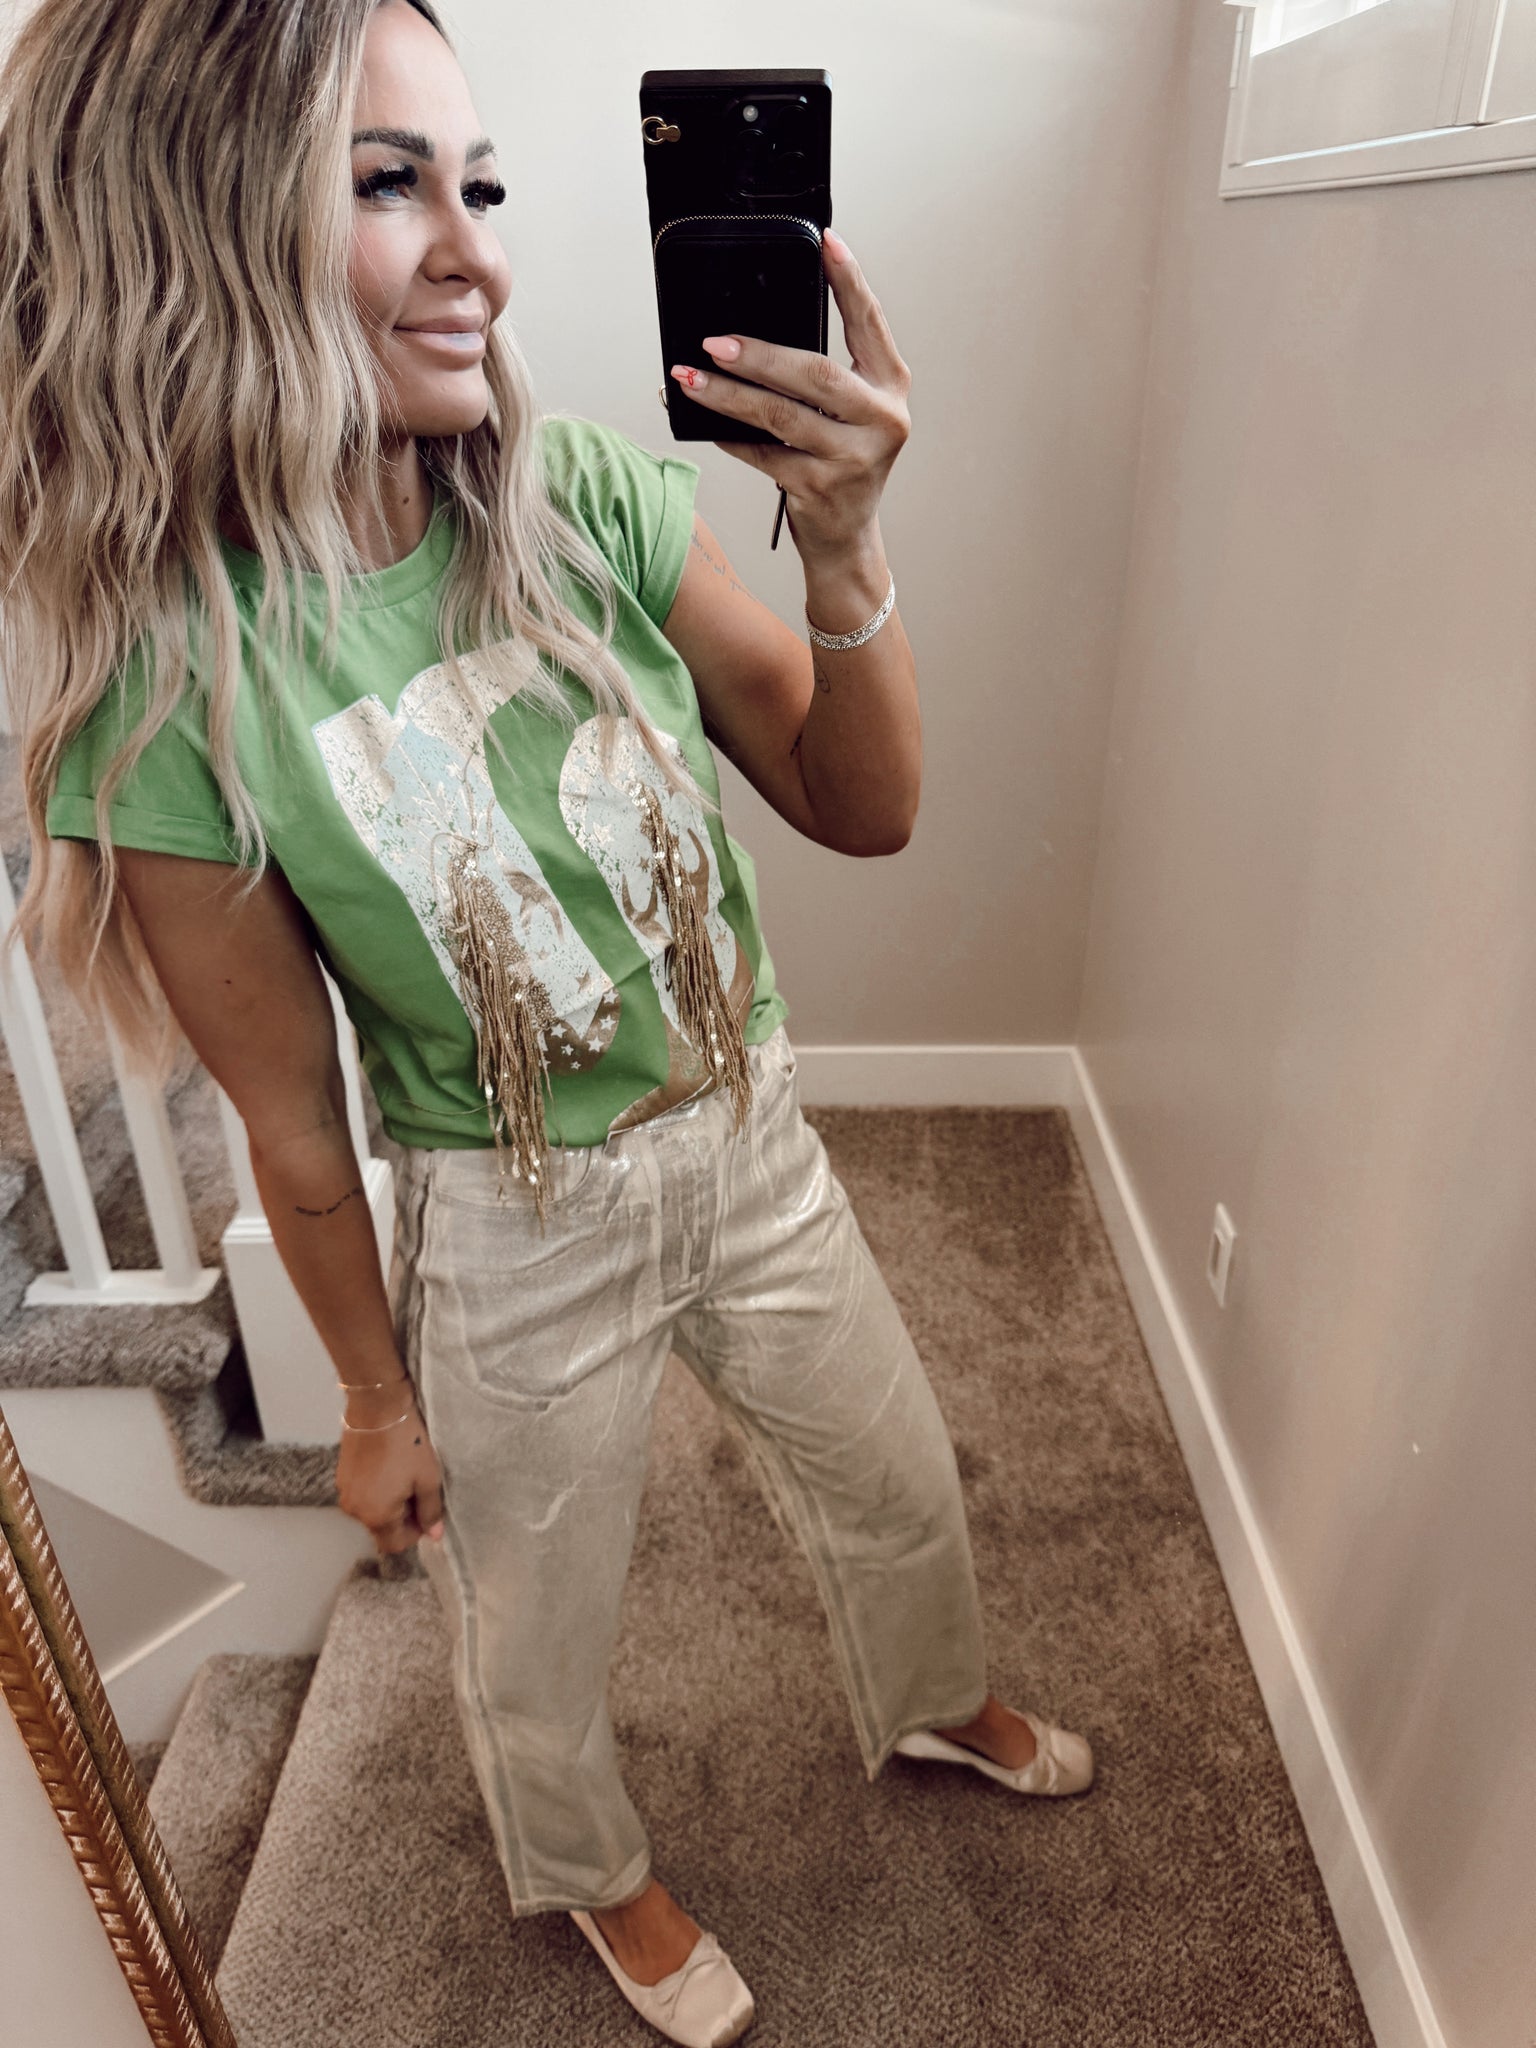 Green boot sparkle tee